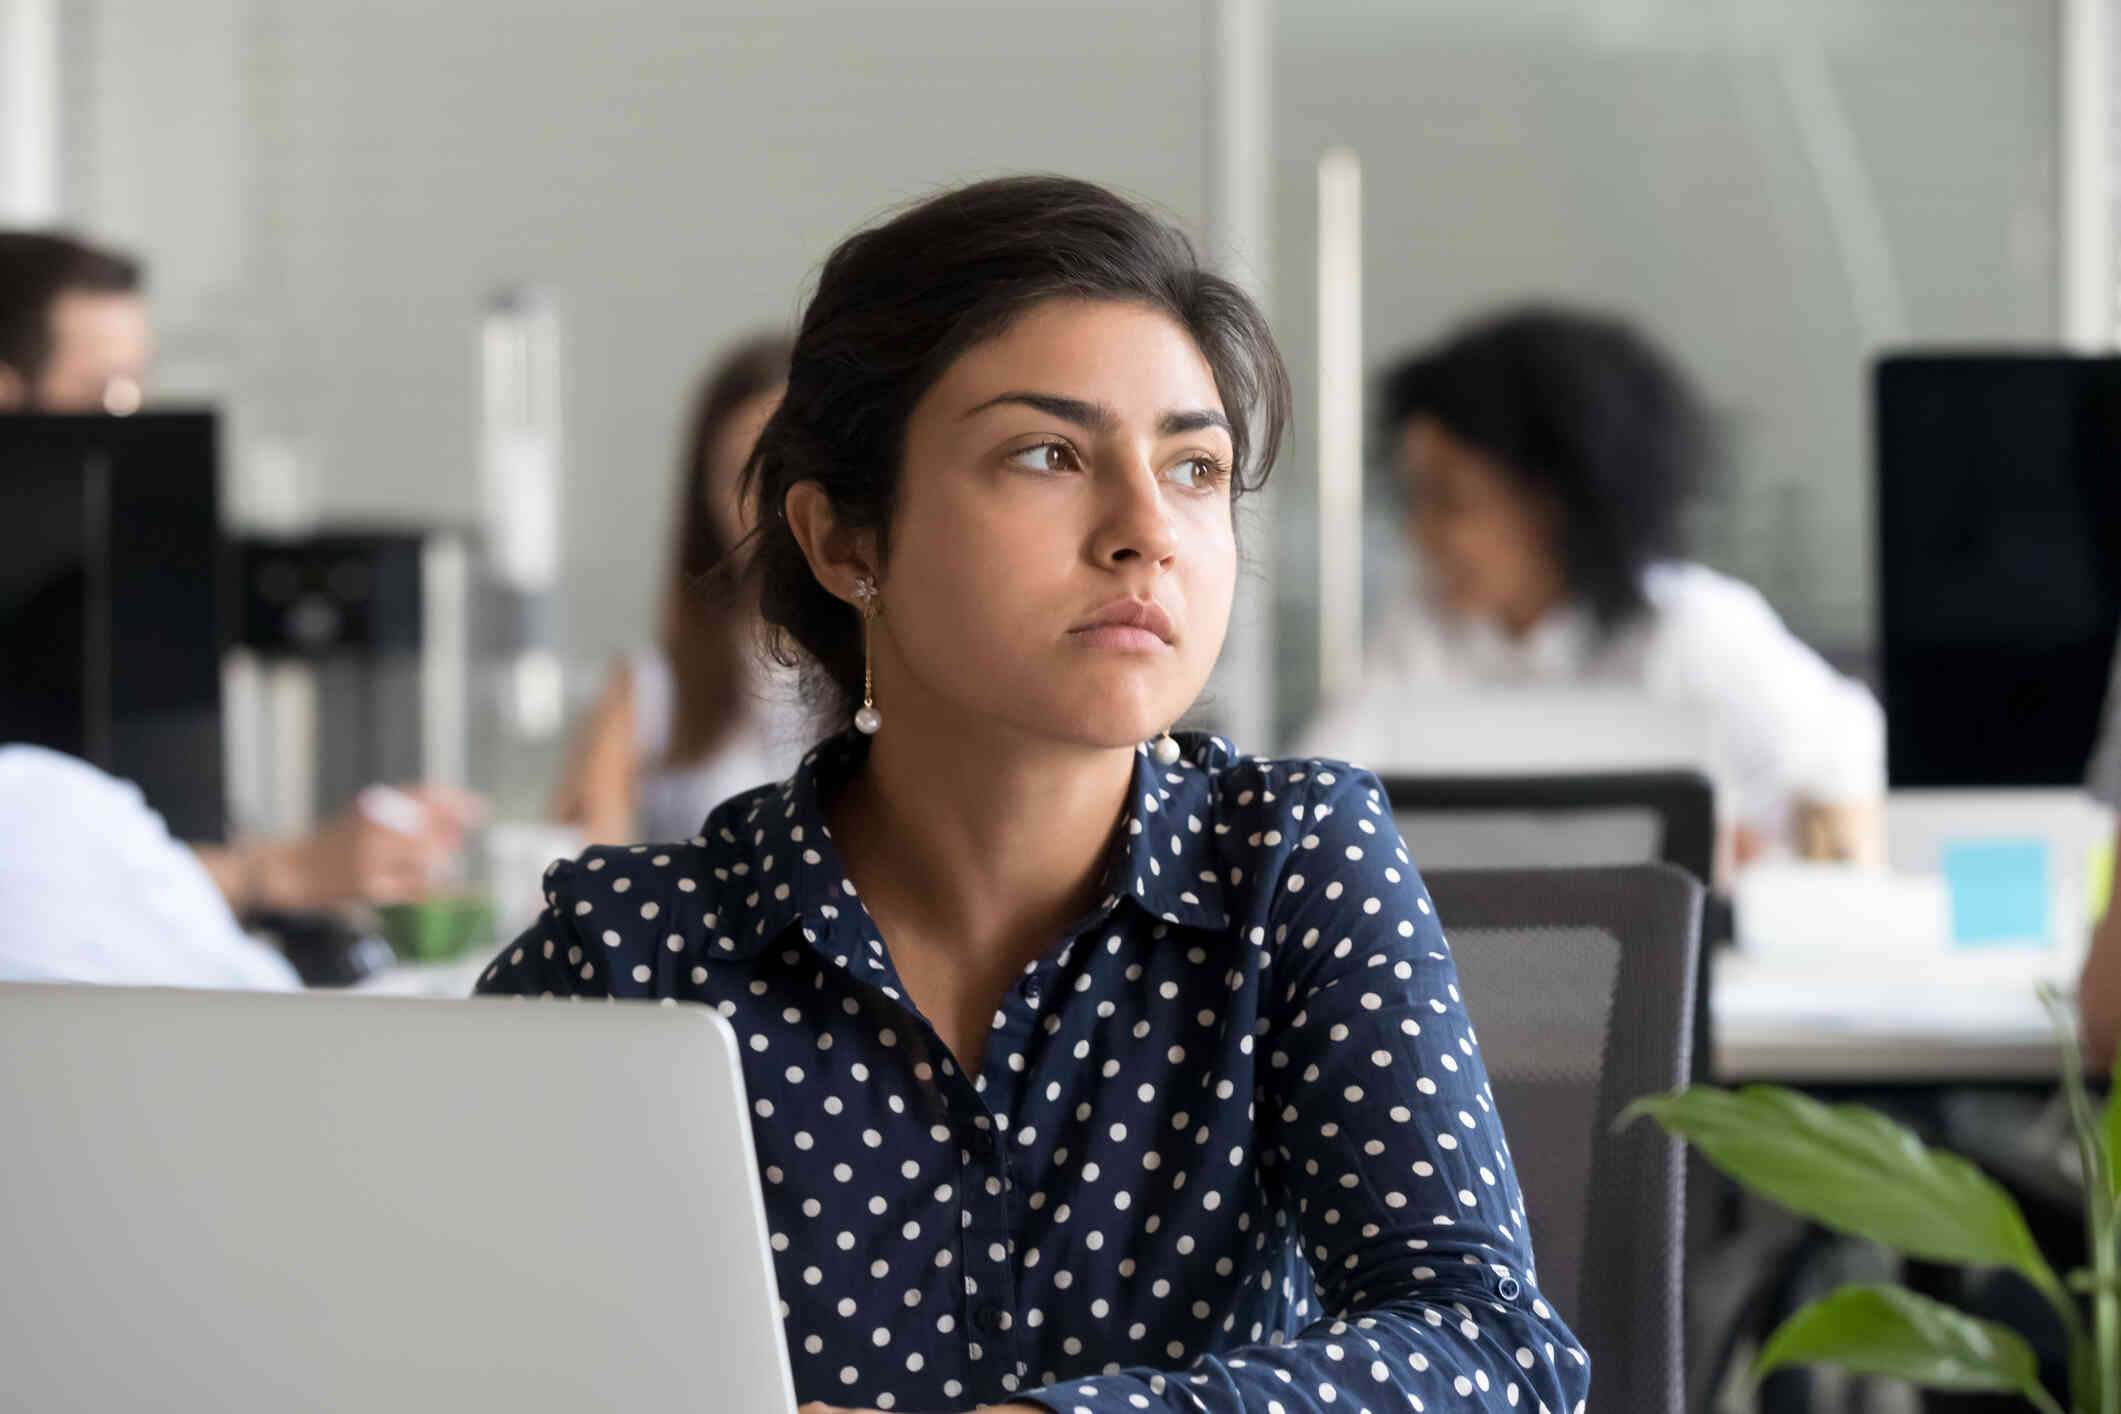 A woman in a polk-a-dot shirt sits behind her computer at her work desk and gazes off with a sad expression.